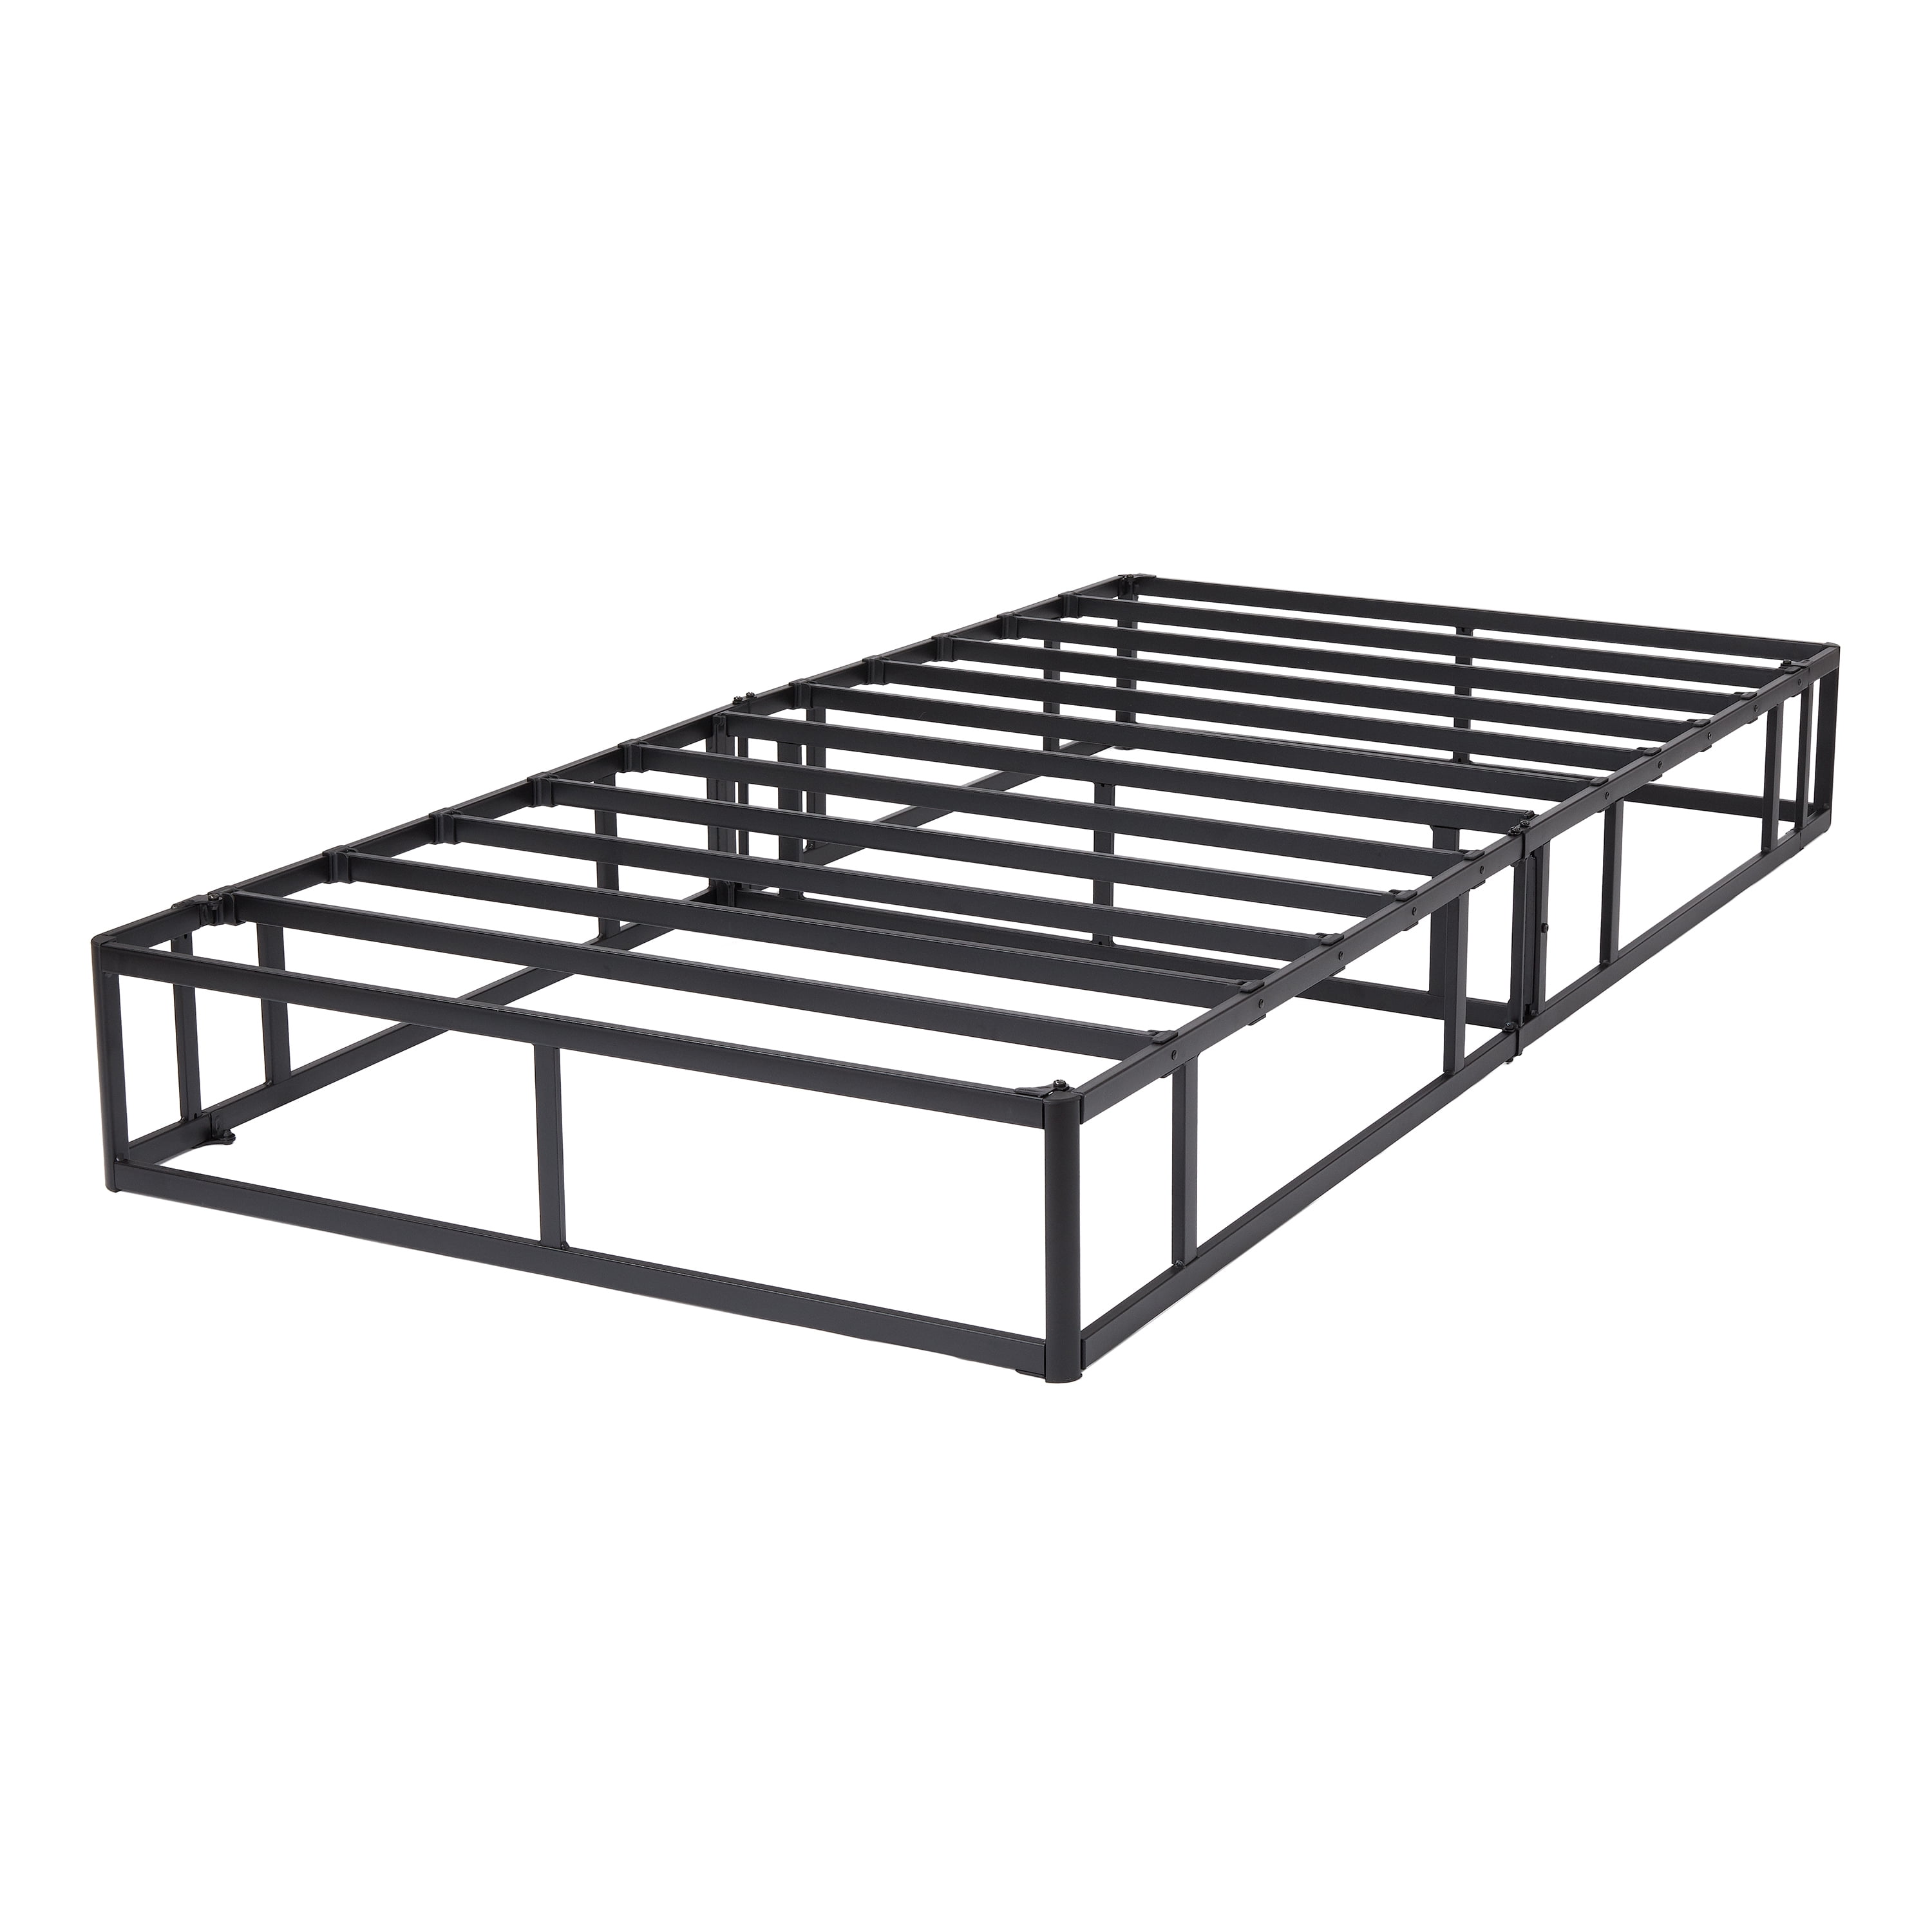 9 Inch Box Spring Ultra-sturdy Support Easy Assembly Multiple Sizes 